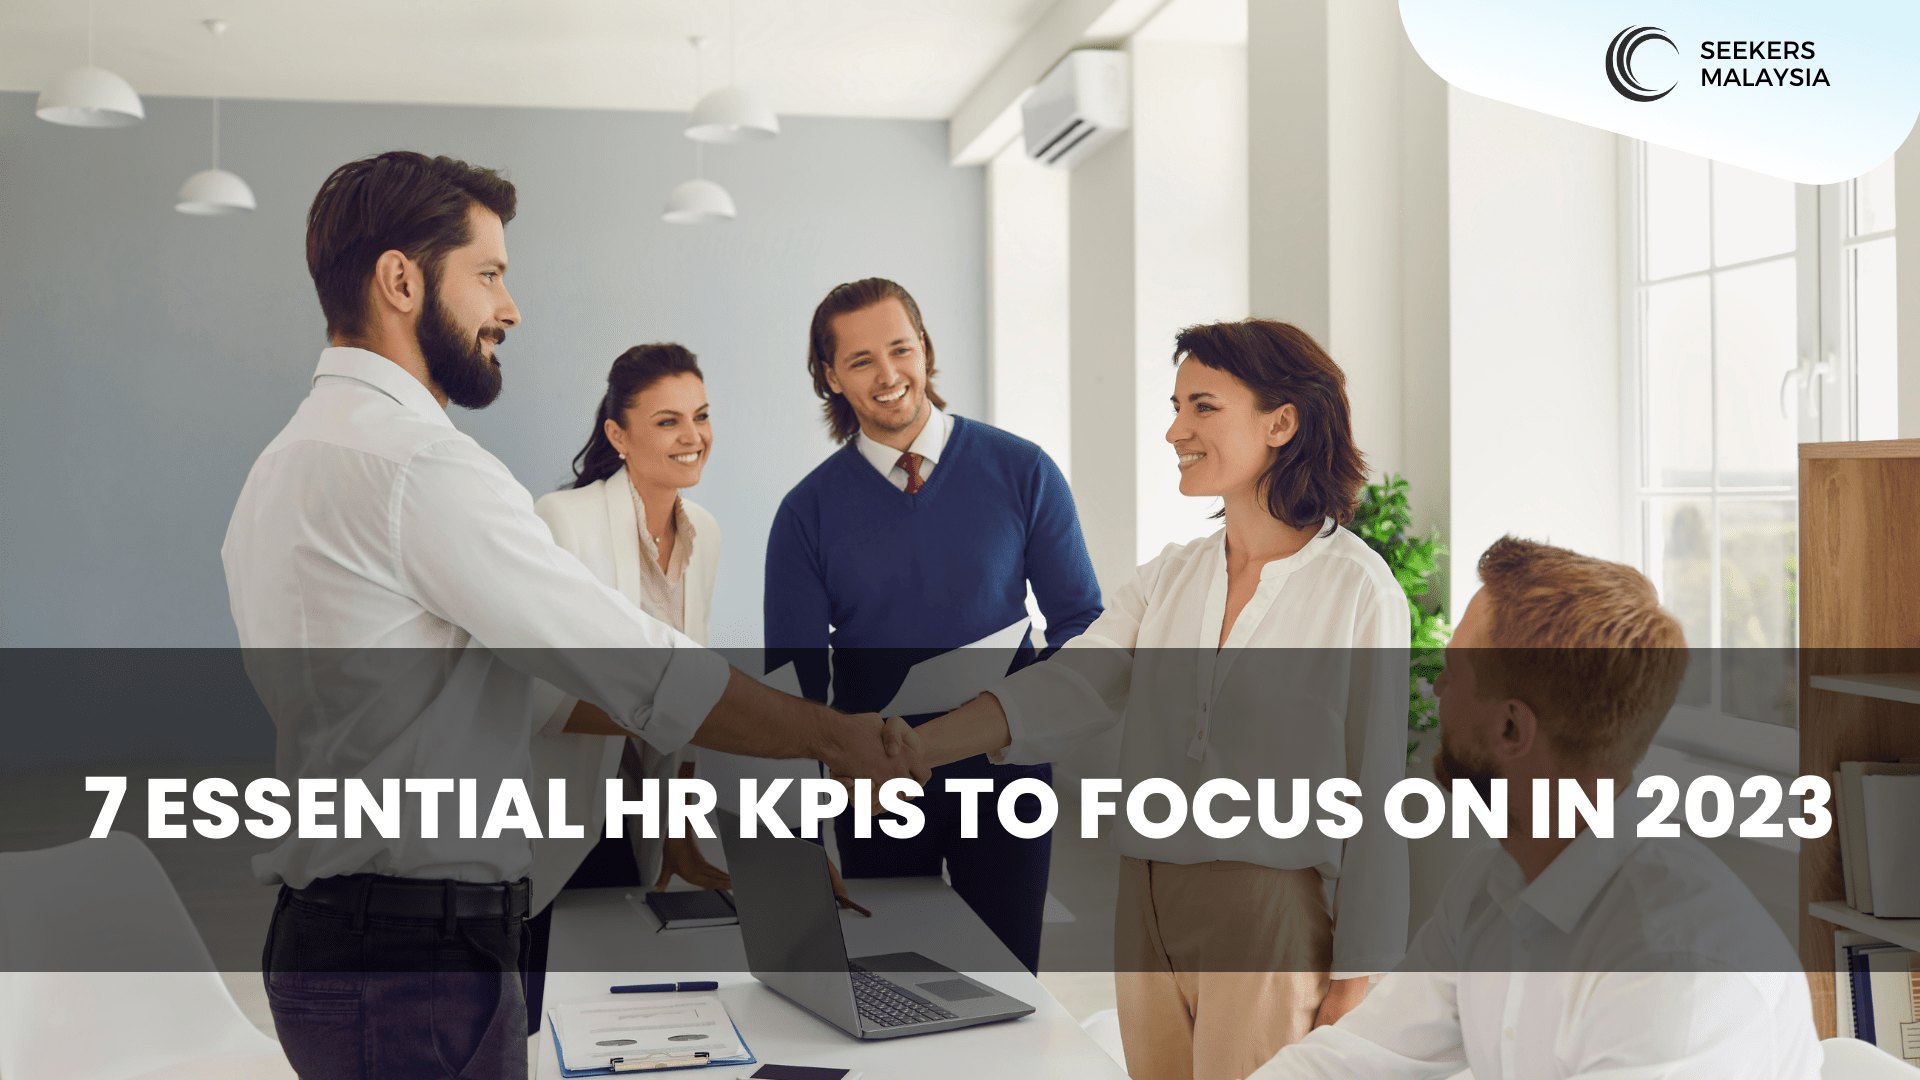 7 Essential Human Resources KPIs to Focus on in 2023